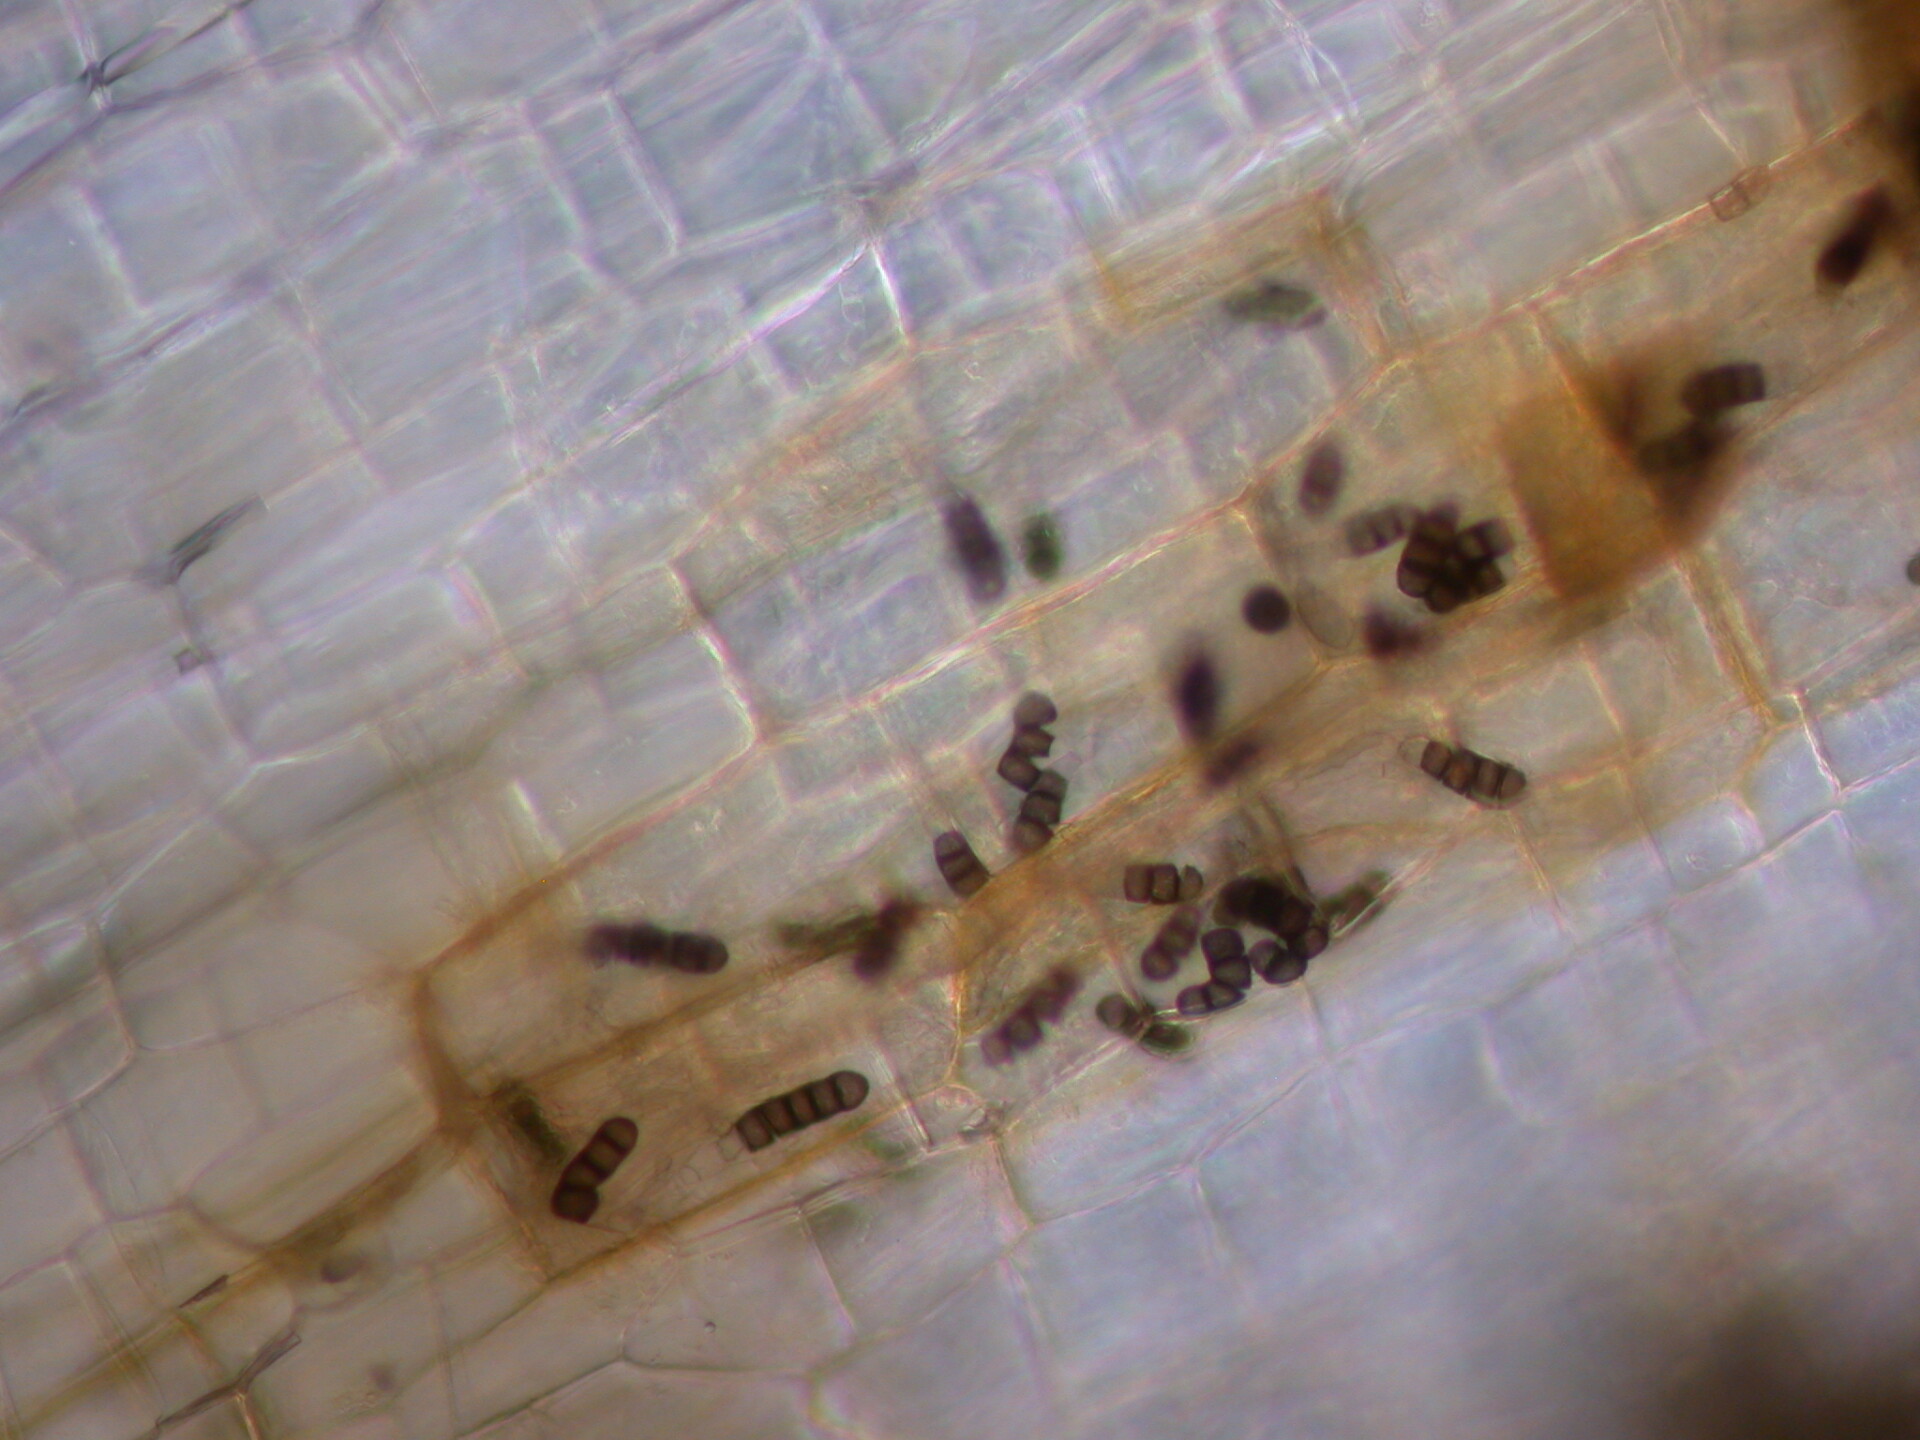 Figure 4. The structures seen here in root tissue are specialized spores known as chlamydospores.